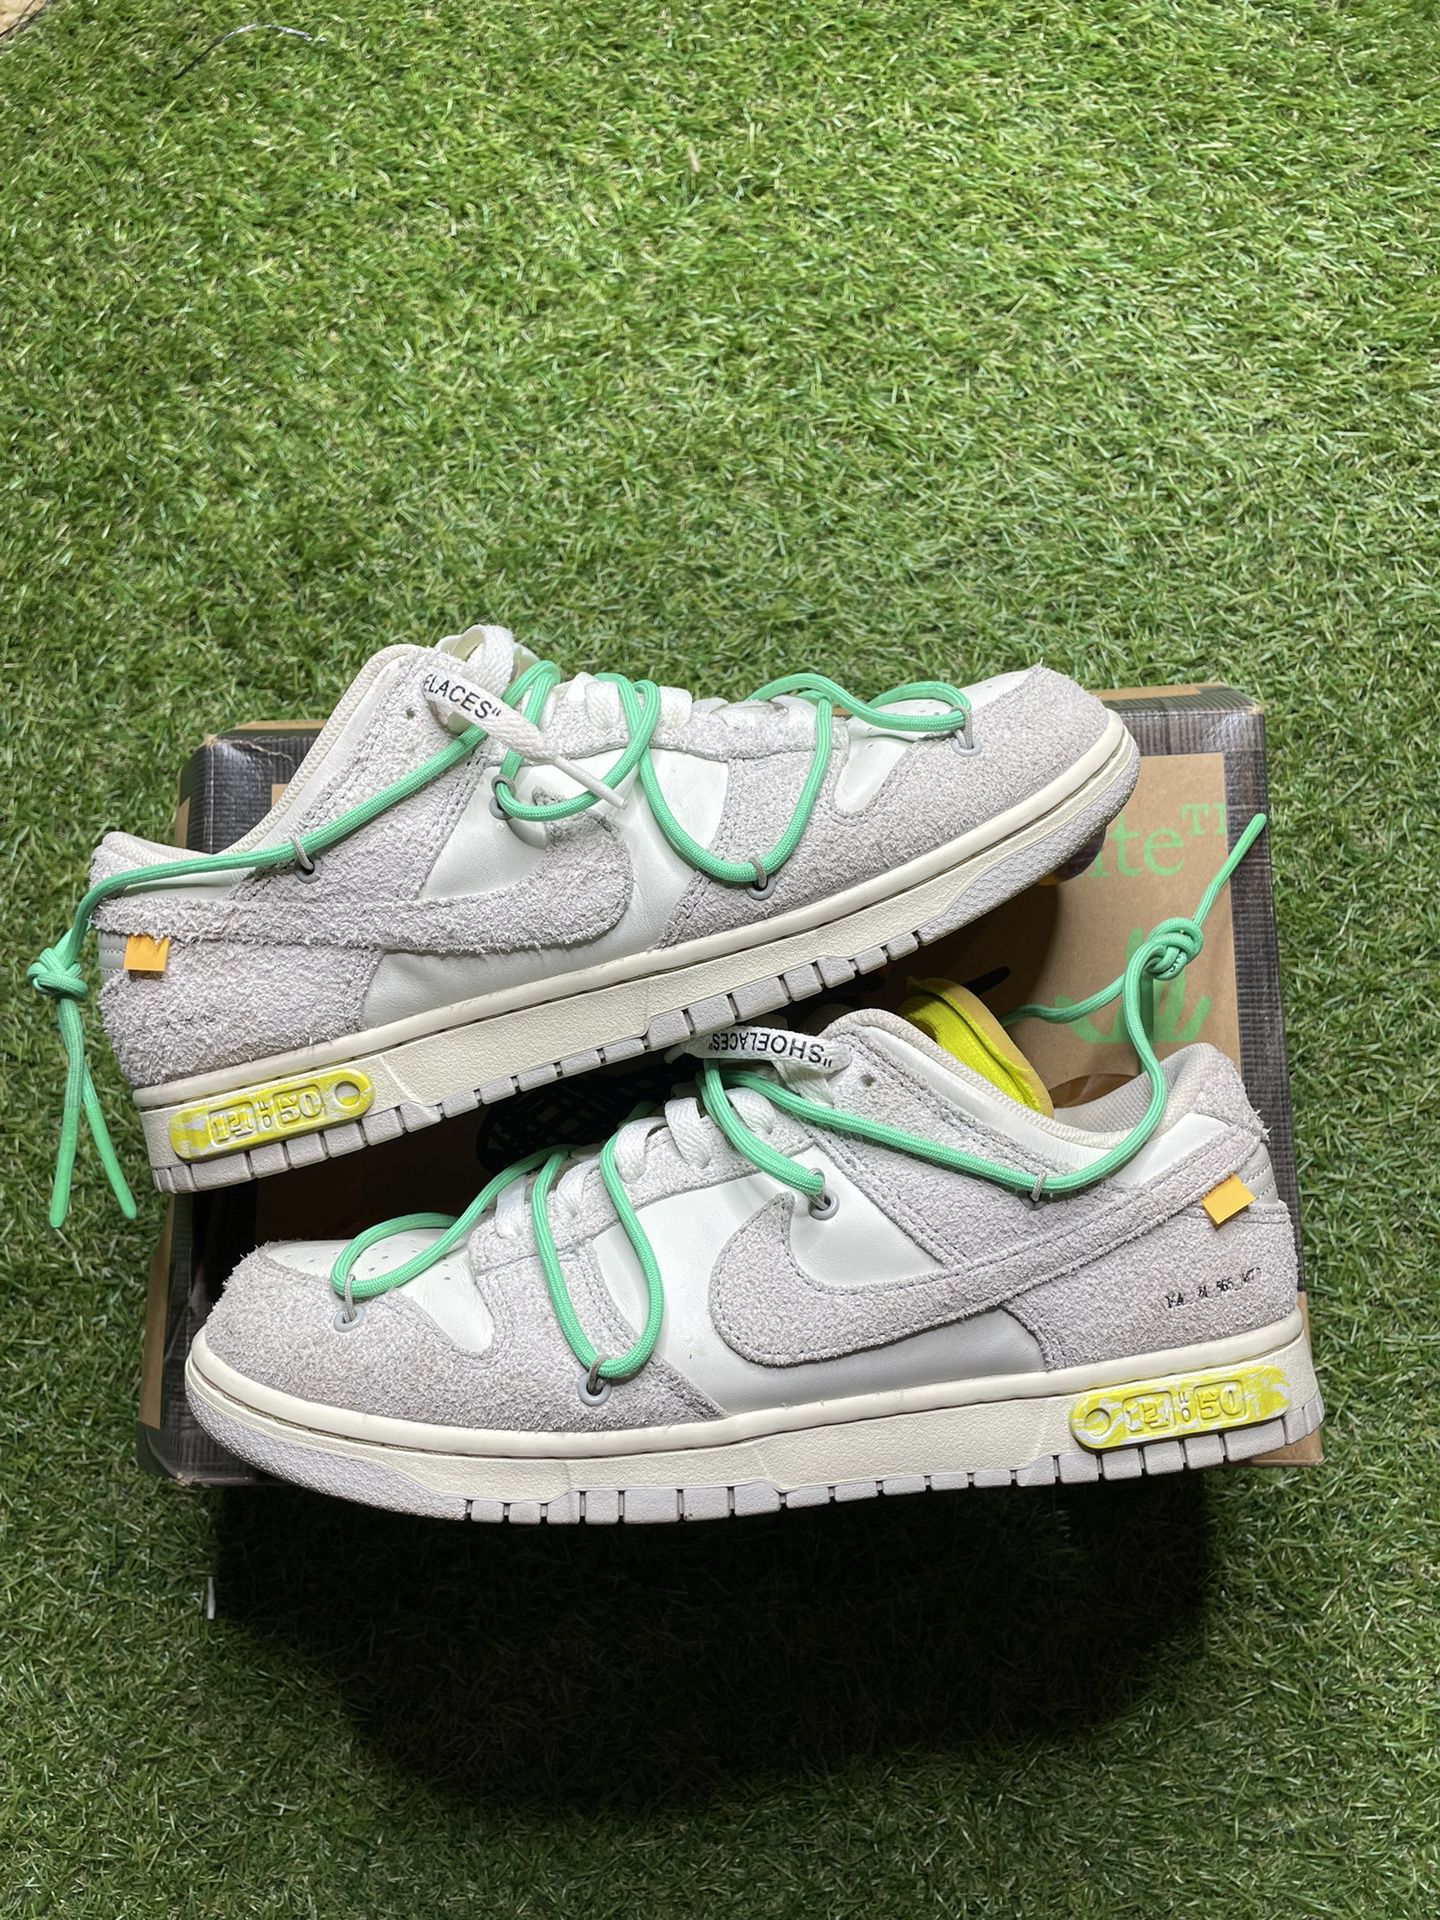 Off-White x Dunk Low Lot 14 of 50